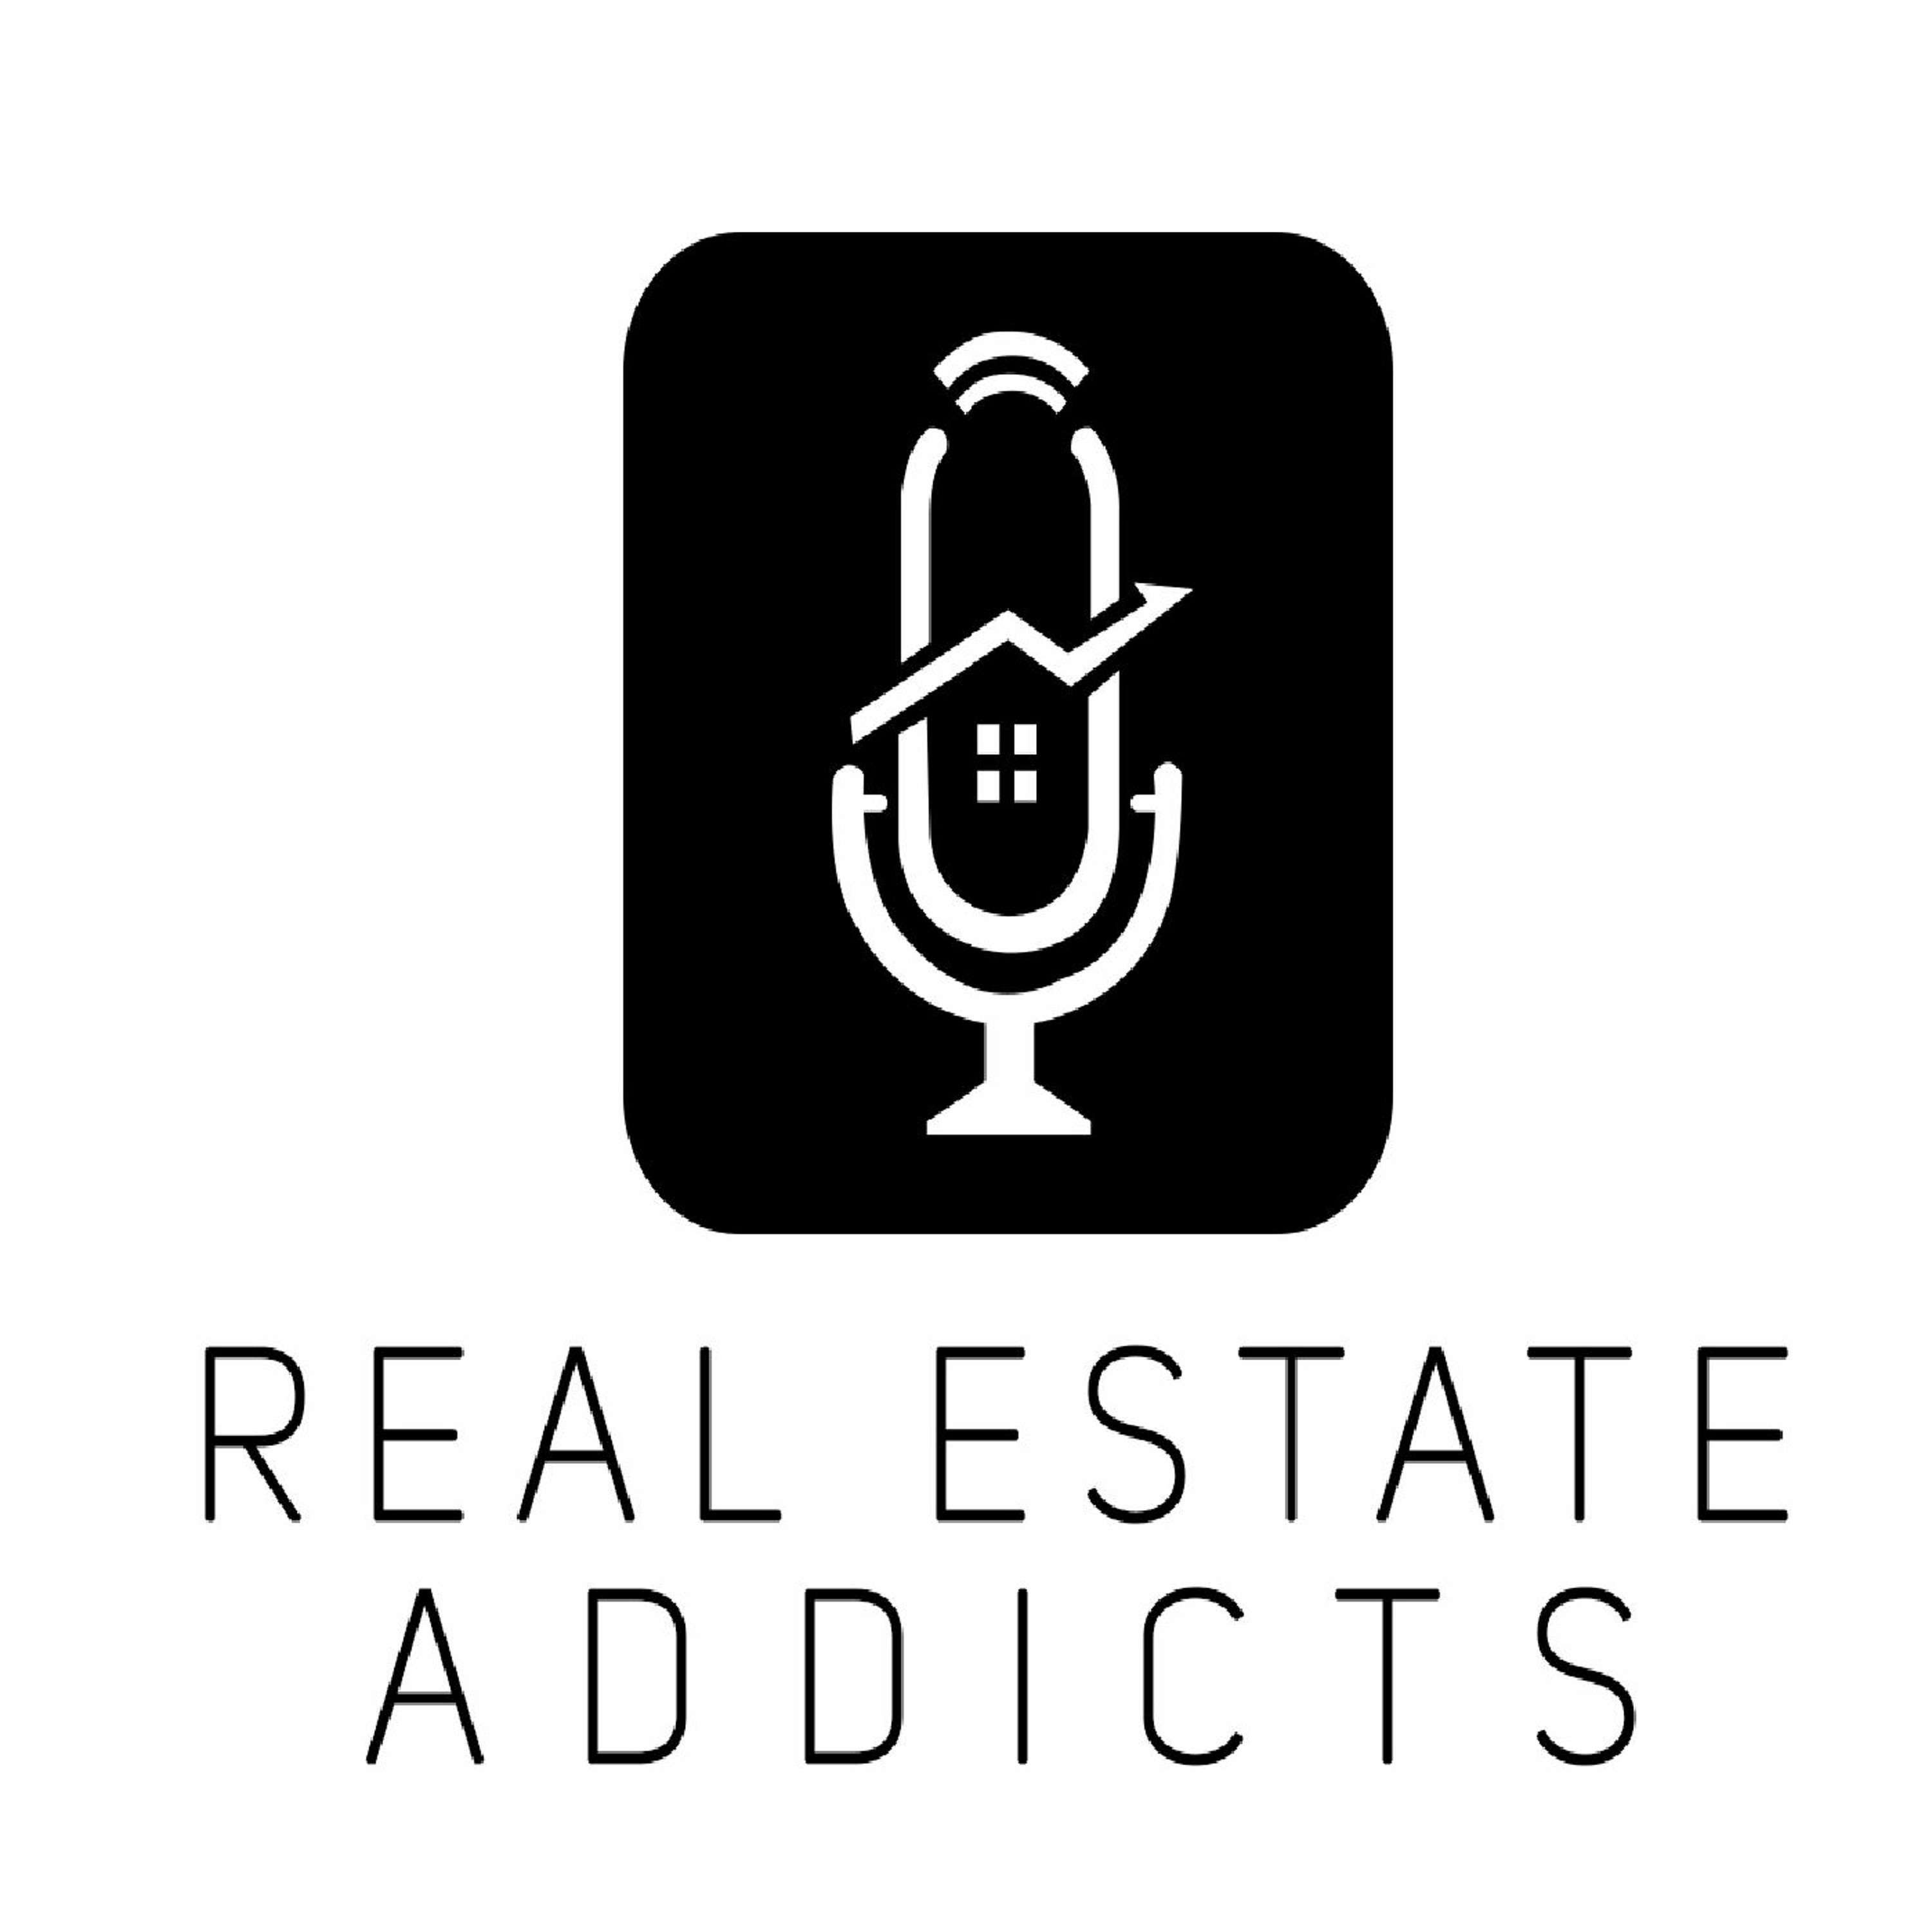 #25 Bryan Lee of Transom Real Estate on Developing Dynamic Real Estate in Boston